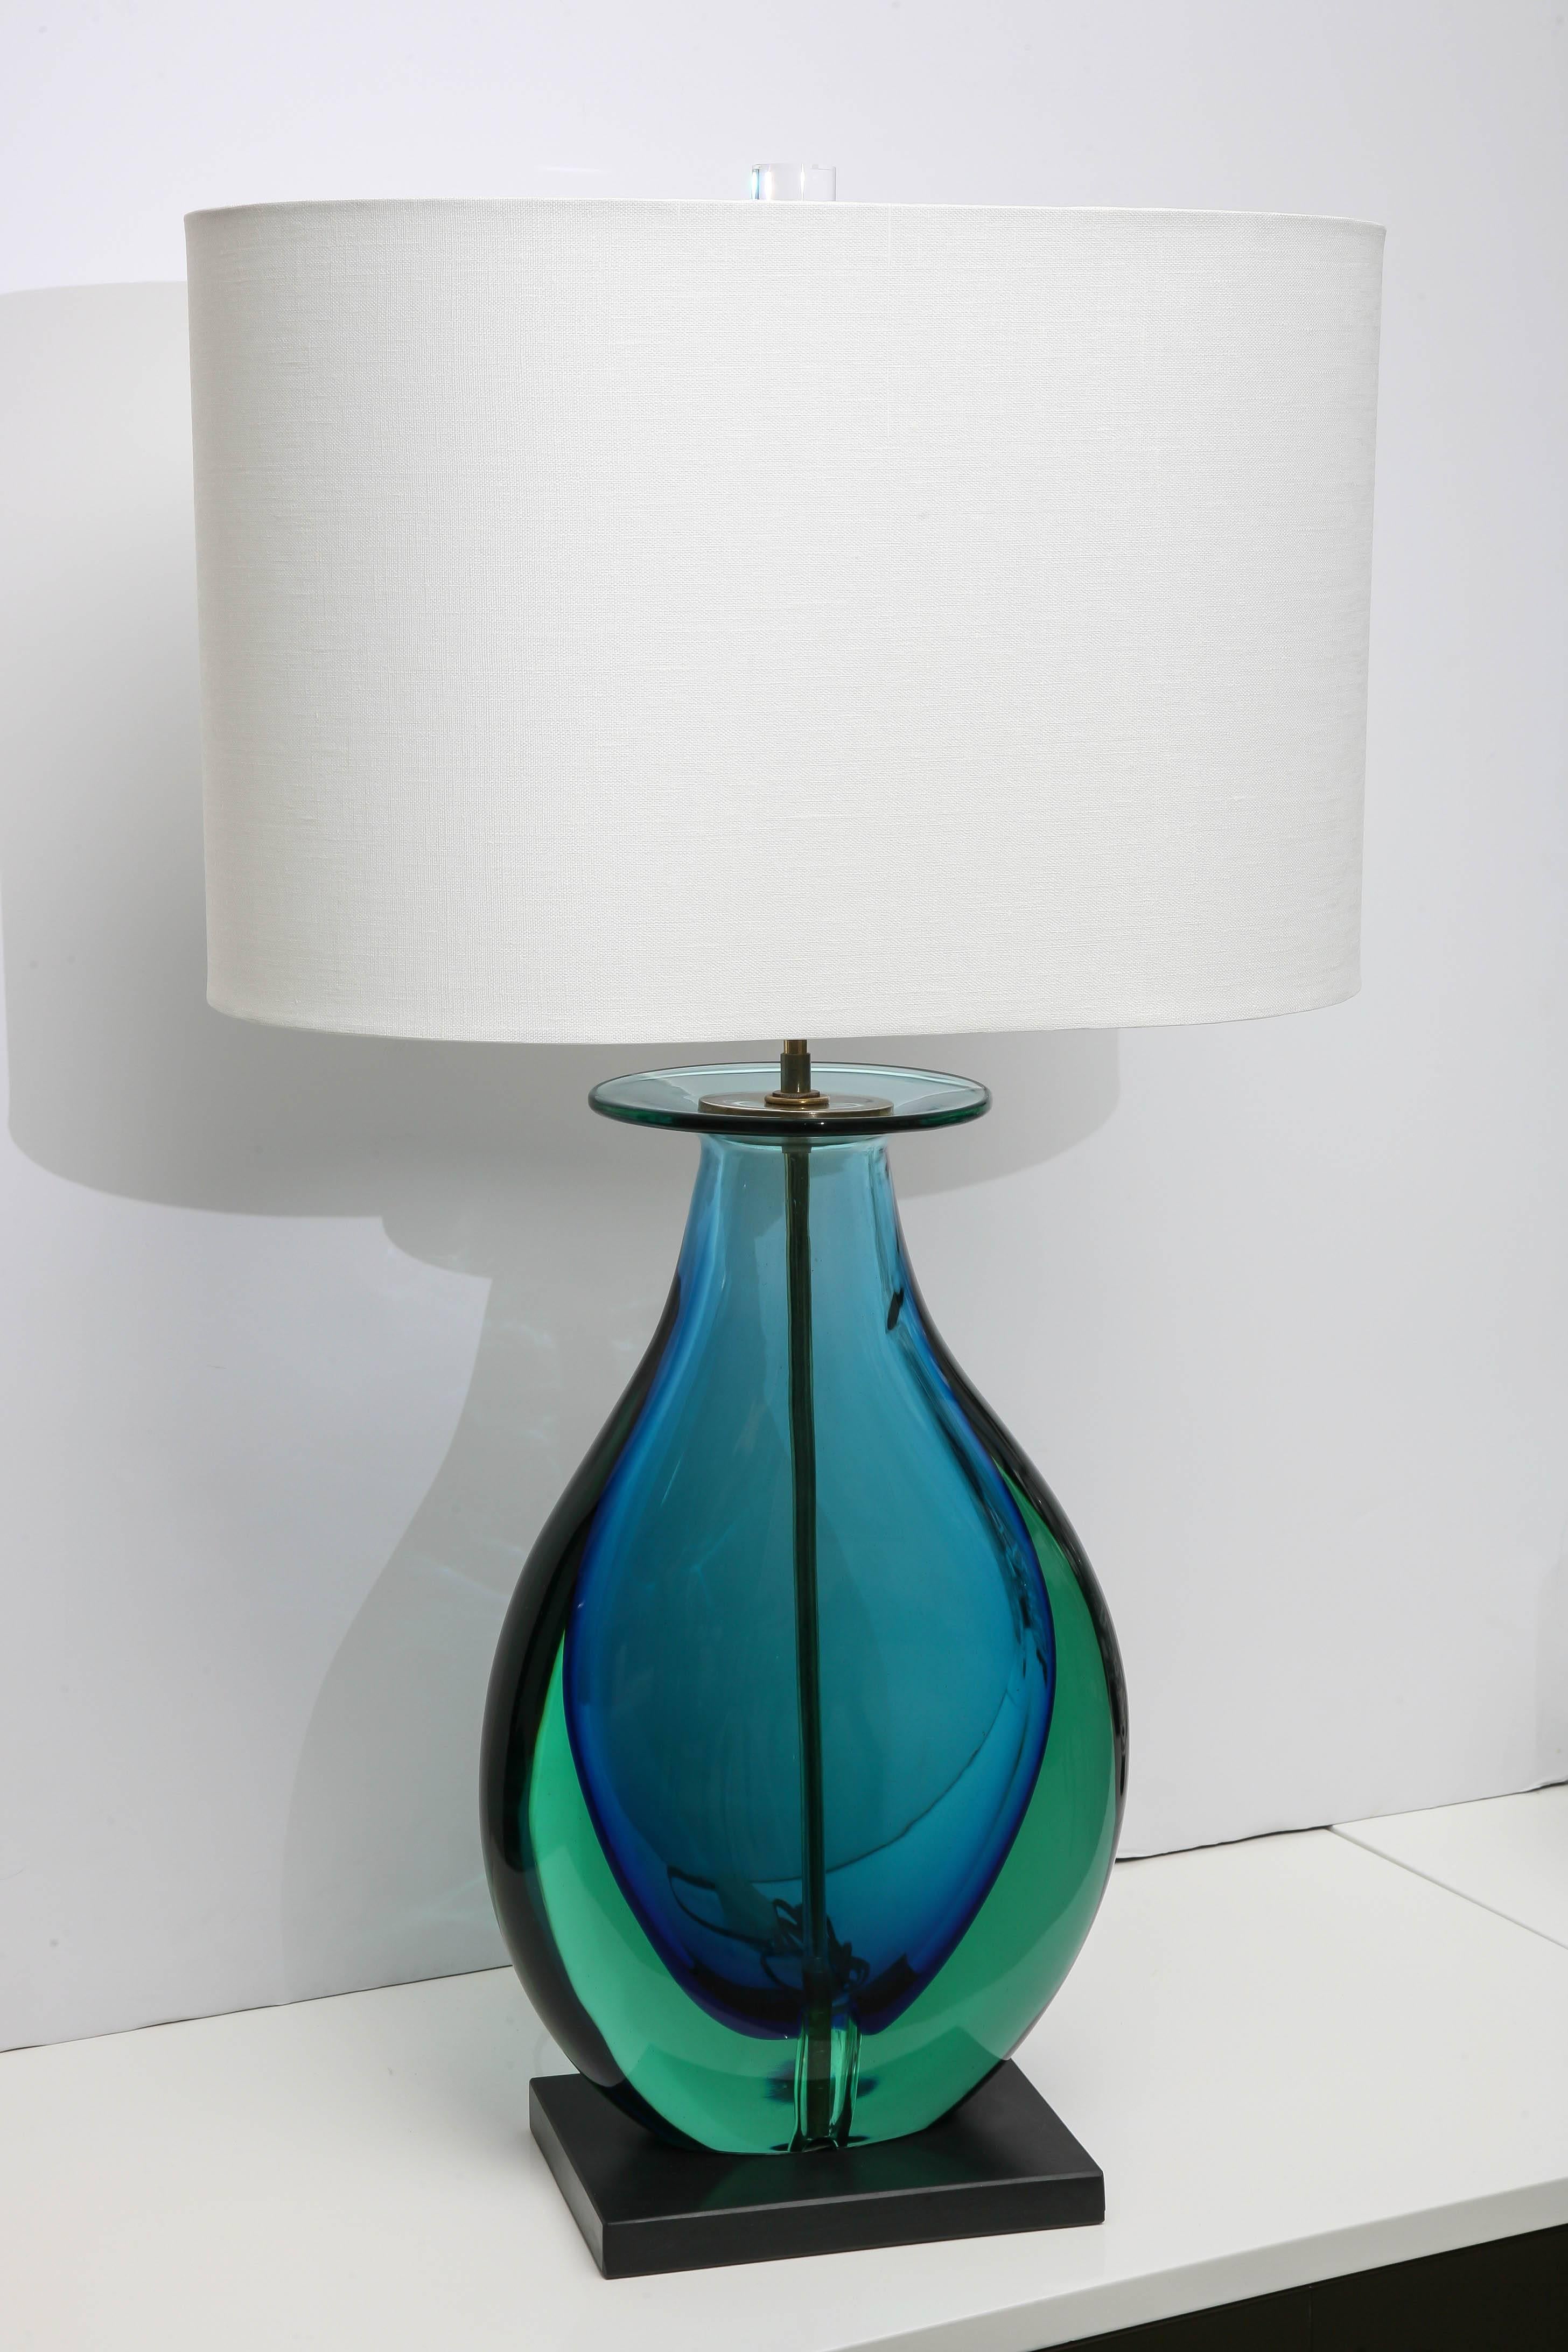 Pair of rare Murano glass lamps by Flavio Poli. The lamps are aqua and marine blue, the technique is Sommerso. The lamps have new custom shades harps and finials.